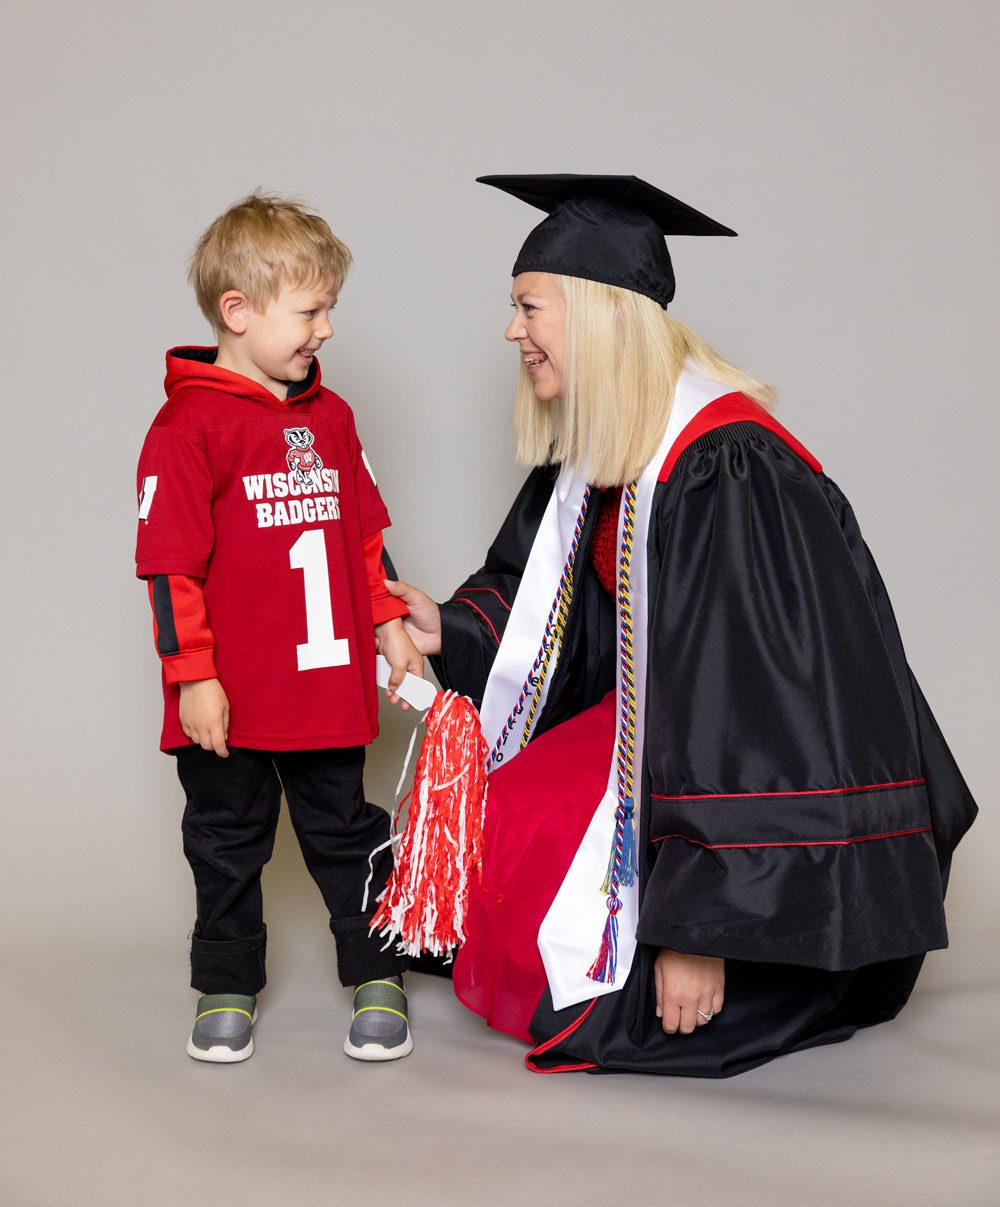 Kristy in her graduation gown with her son